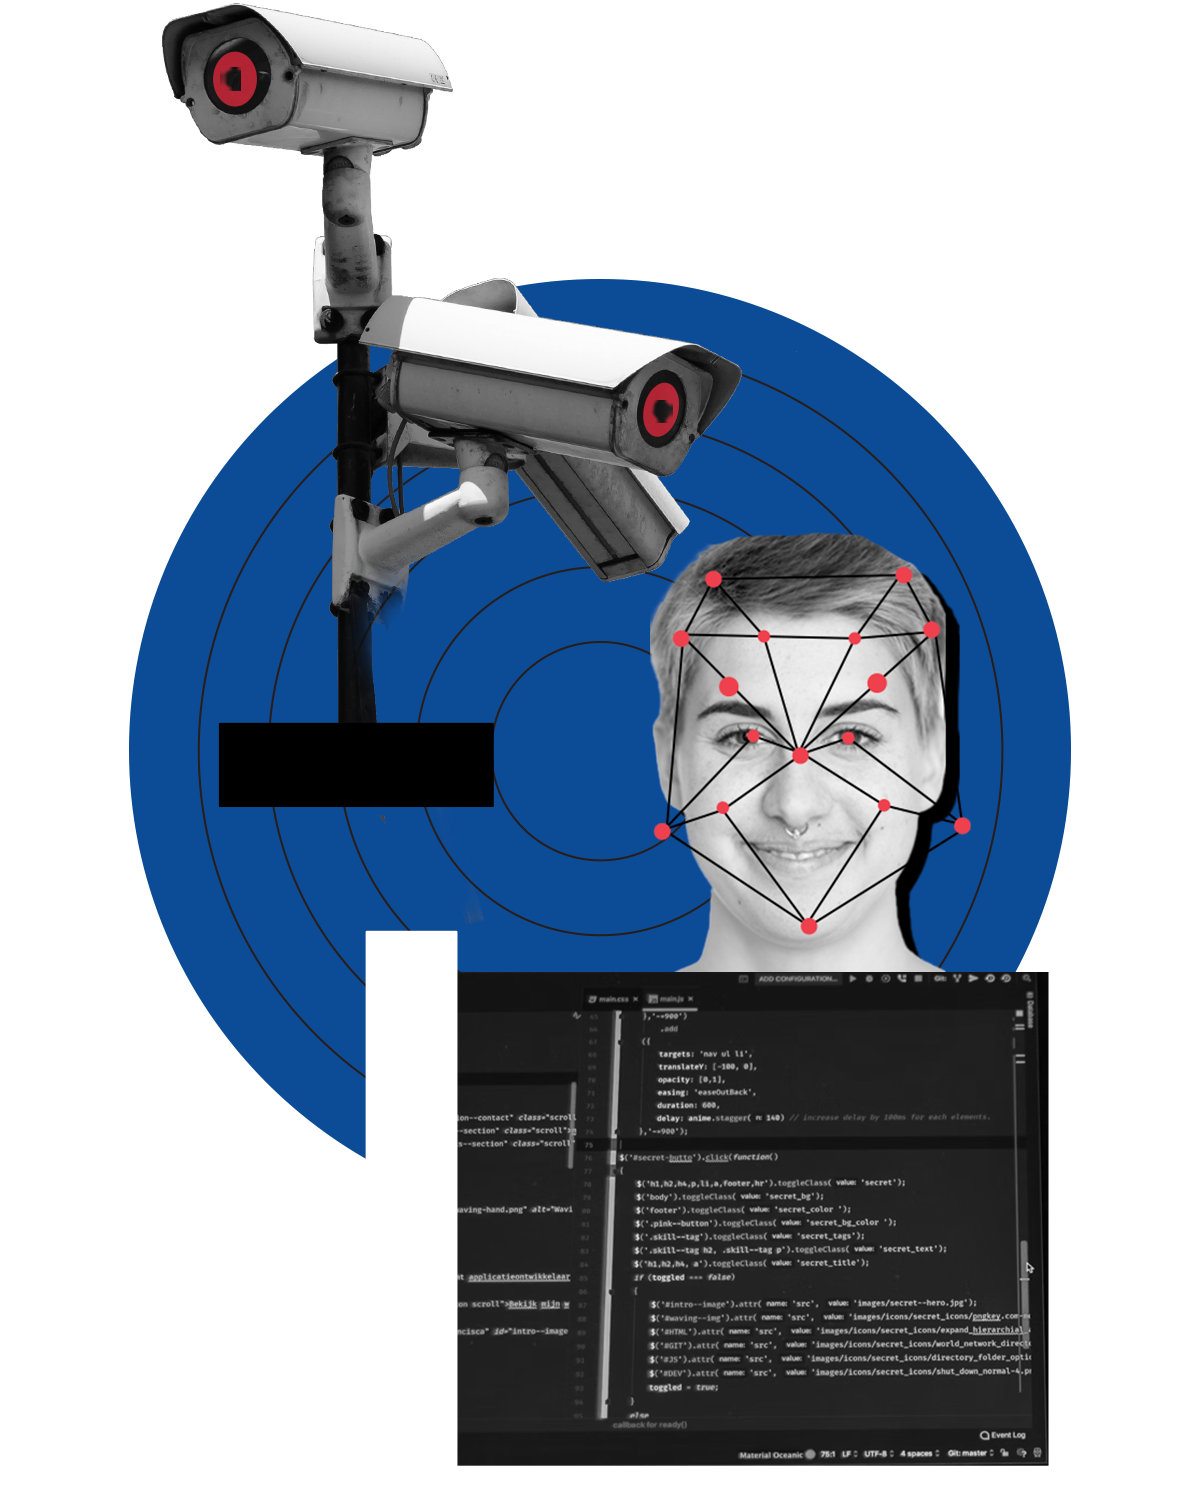 Privacy Collage. Elements include: surveillance cameras, facial recognition tech, and a computer screen of code.